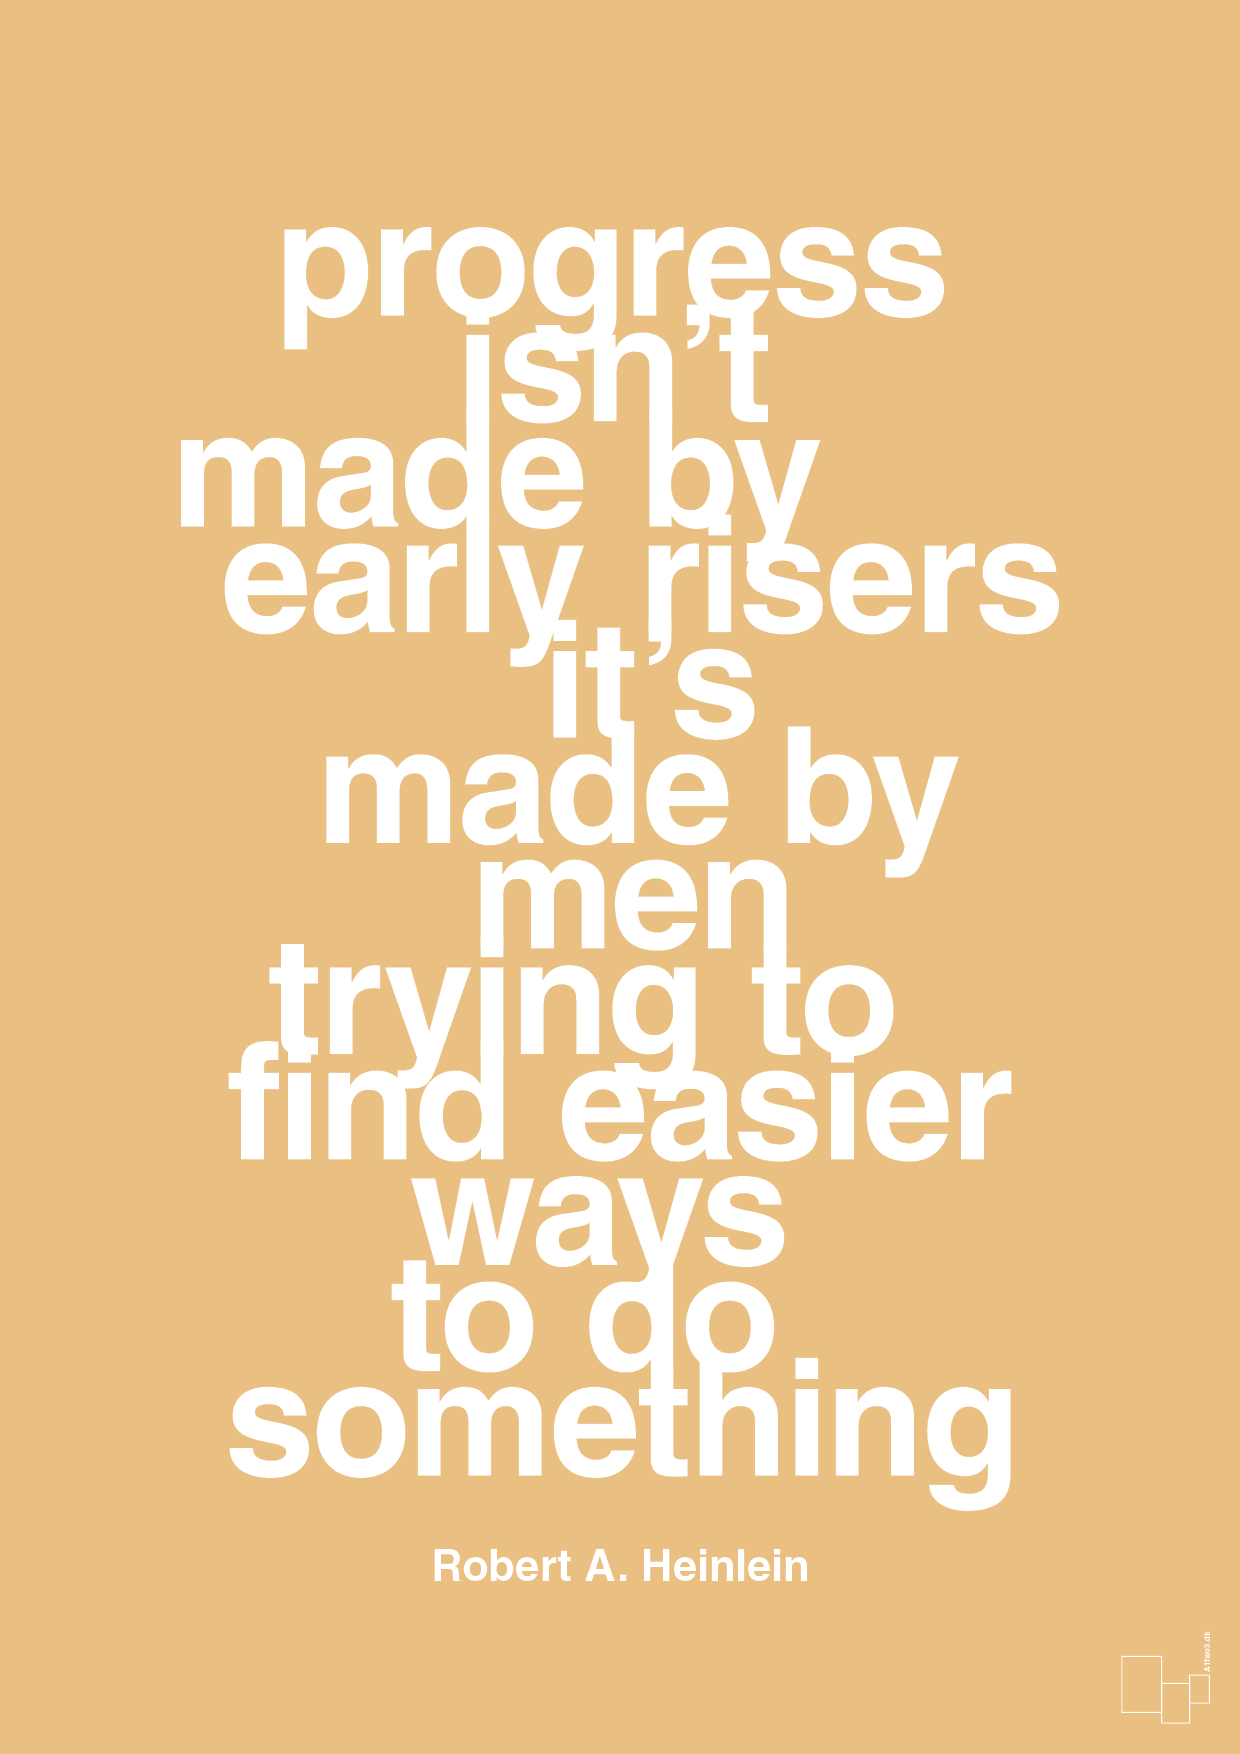 progress isnt made by early risers - Plakat med Citater i Charismatic